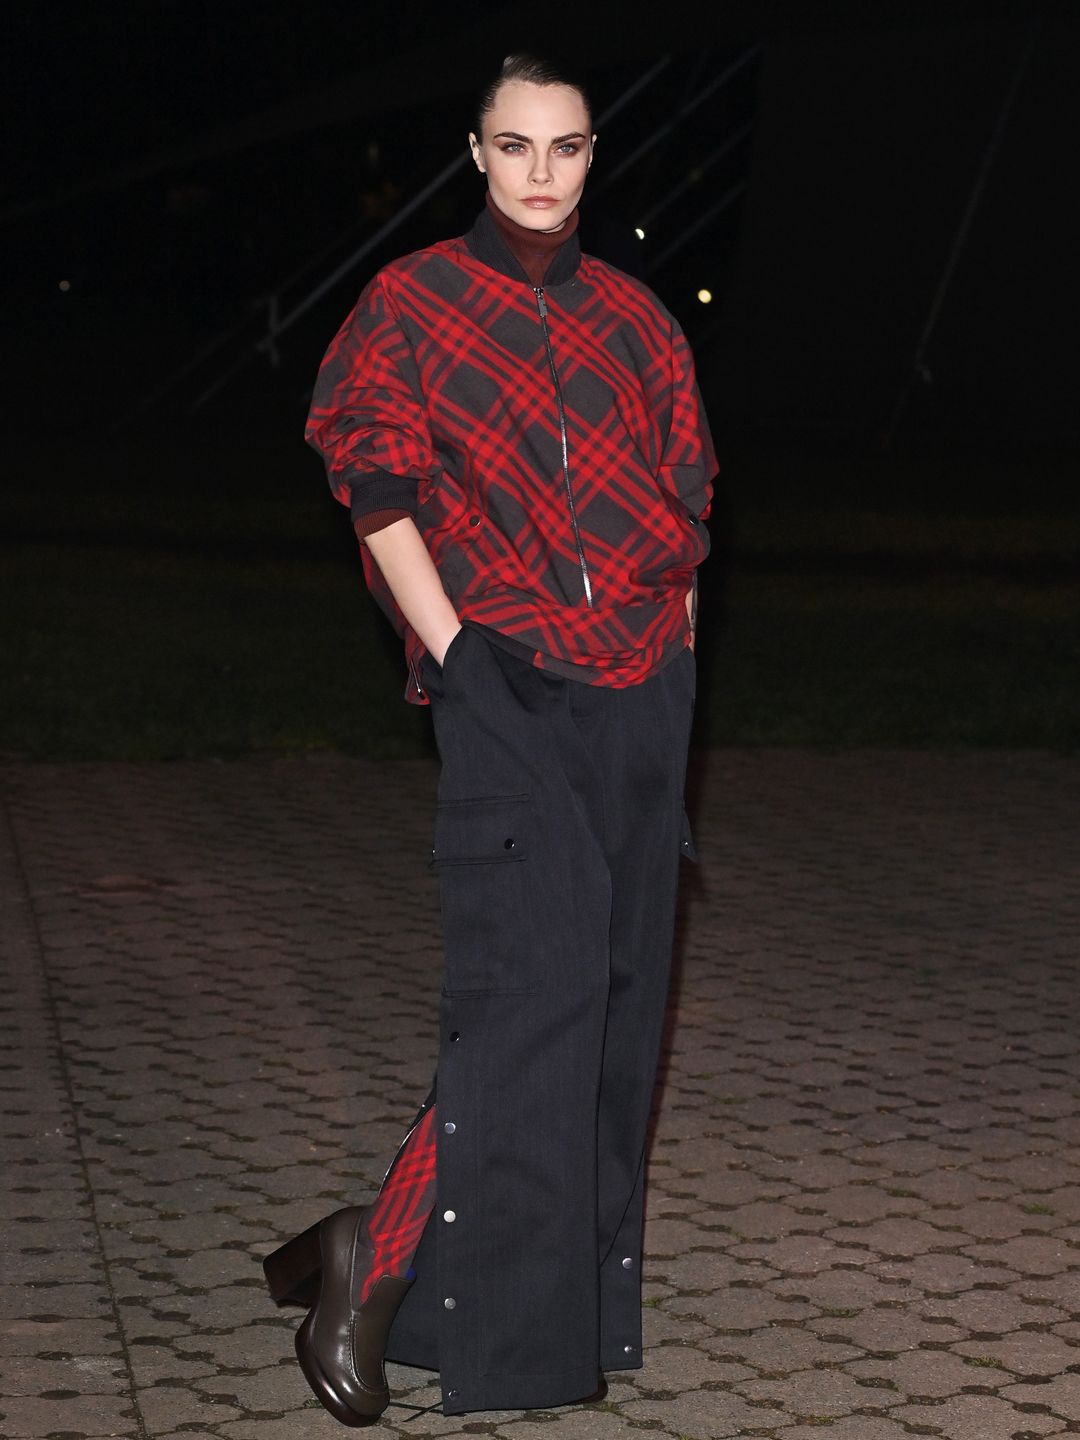 Cara Delevingne chose a red and black checkered bomber jacket and matching tights ensemble for the Burberry show.